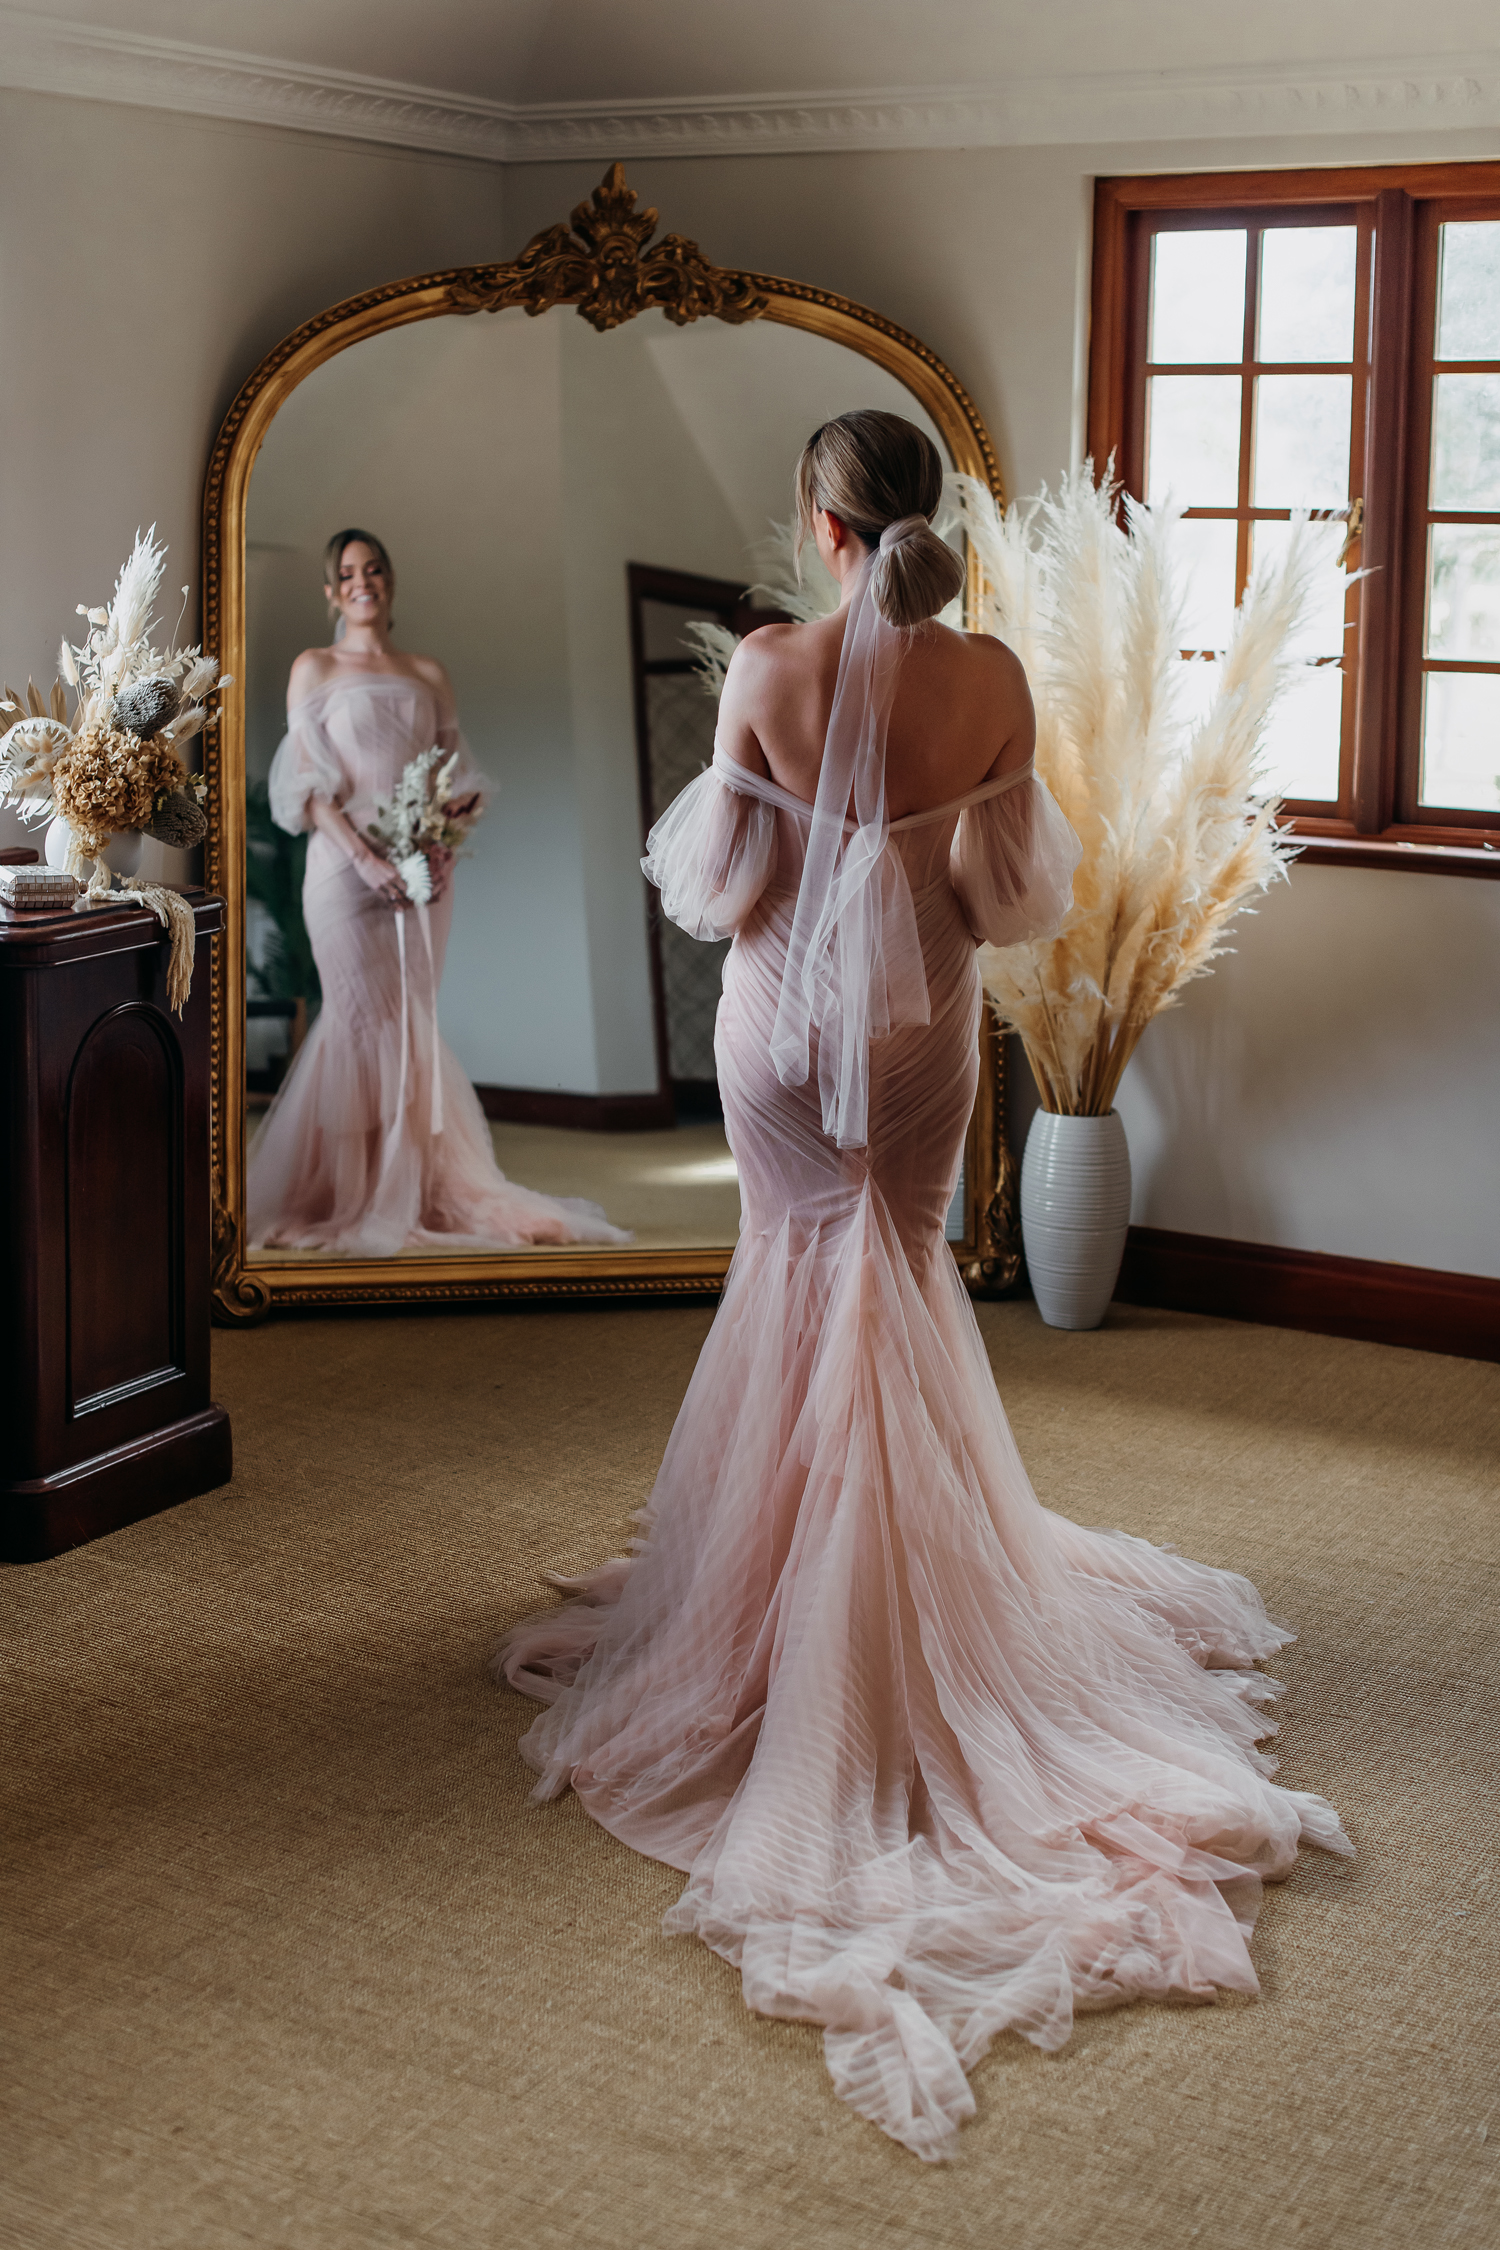 Pretty in Pink Gets A Whole New Boho Meaning in This Romantic Elopement Editorial